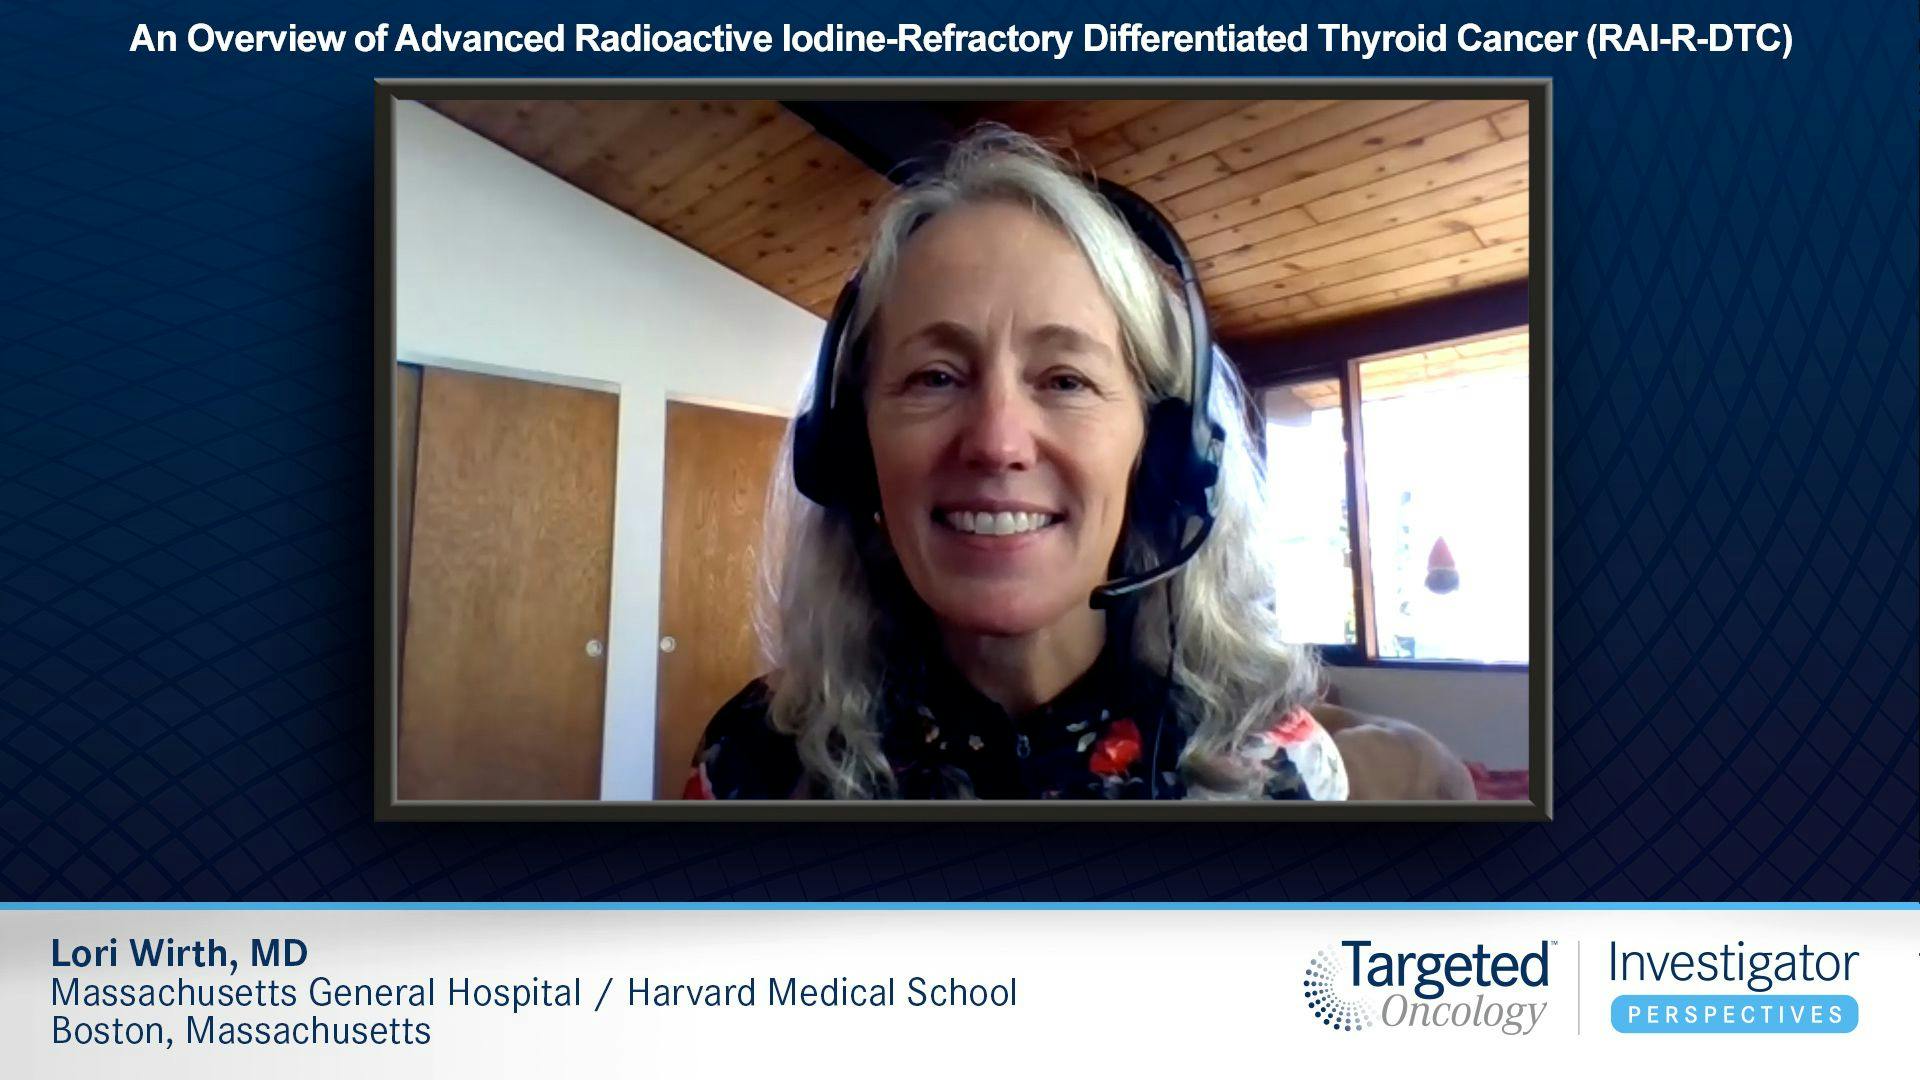 An Overview of Advanced Radioactive Iodine-Refractory Differentiated Thyroid Cancer (RAI-R-DTC)